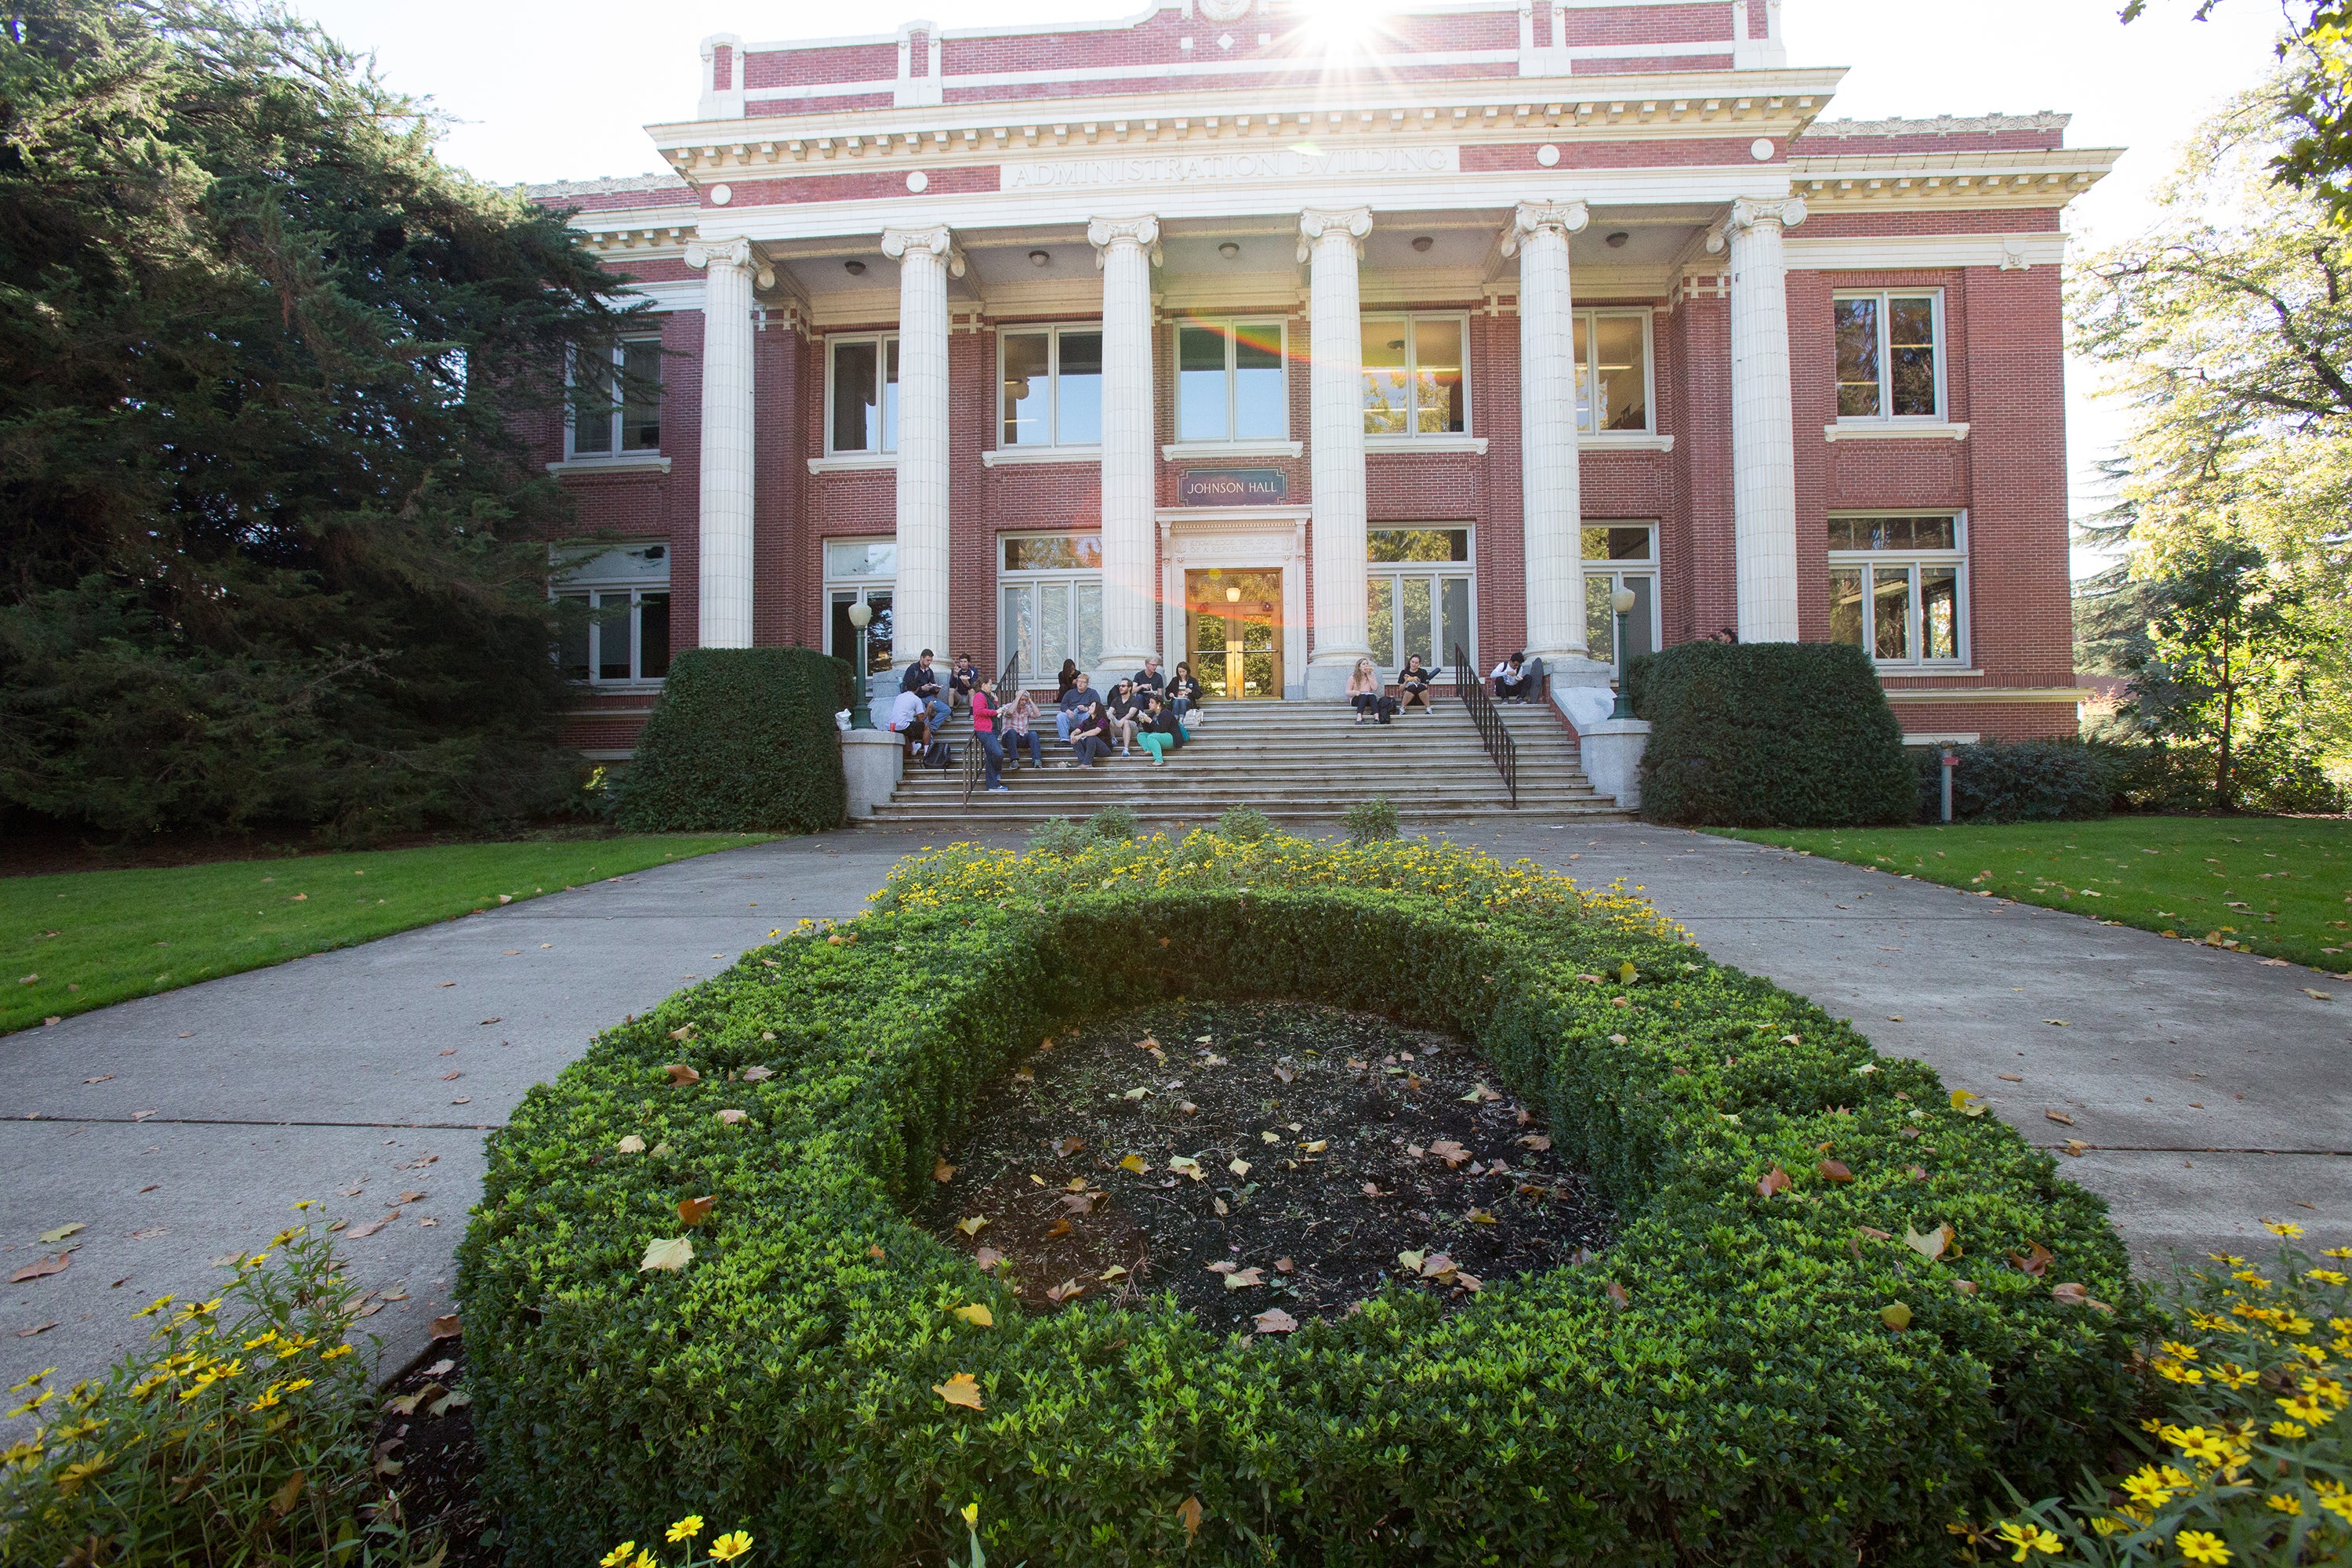 Landscaped Oregon &quot;O&quot; in front of Johnson hall, a red brick building with white front columns.